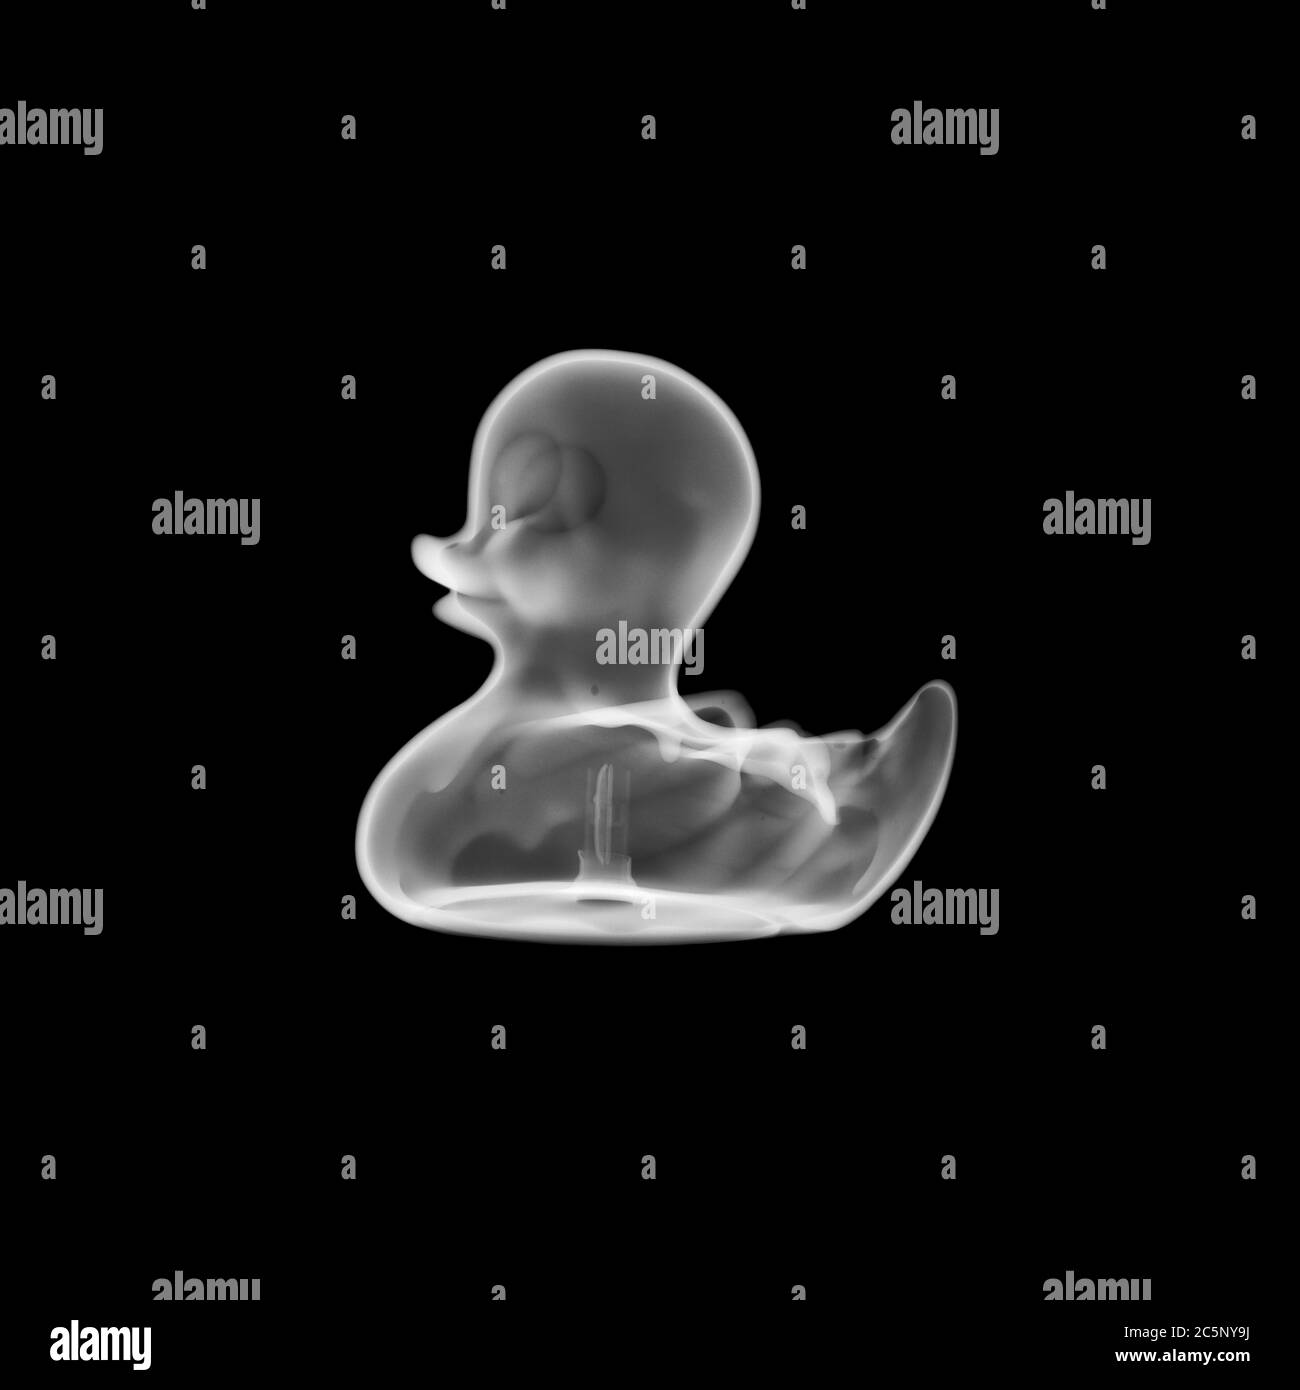 Toy rubber duck, X-ray. Stock Photo